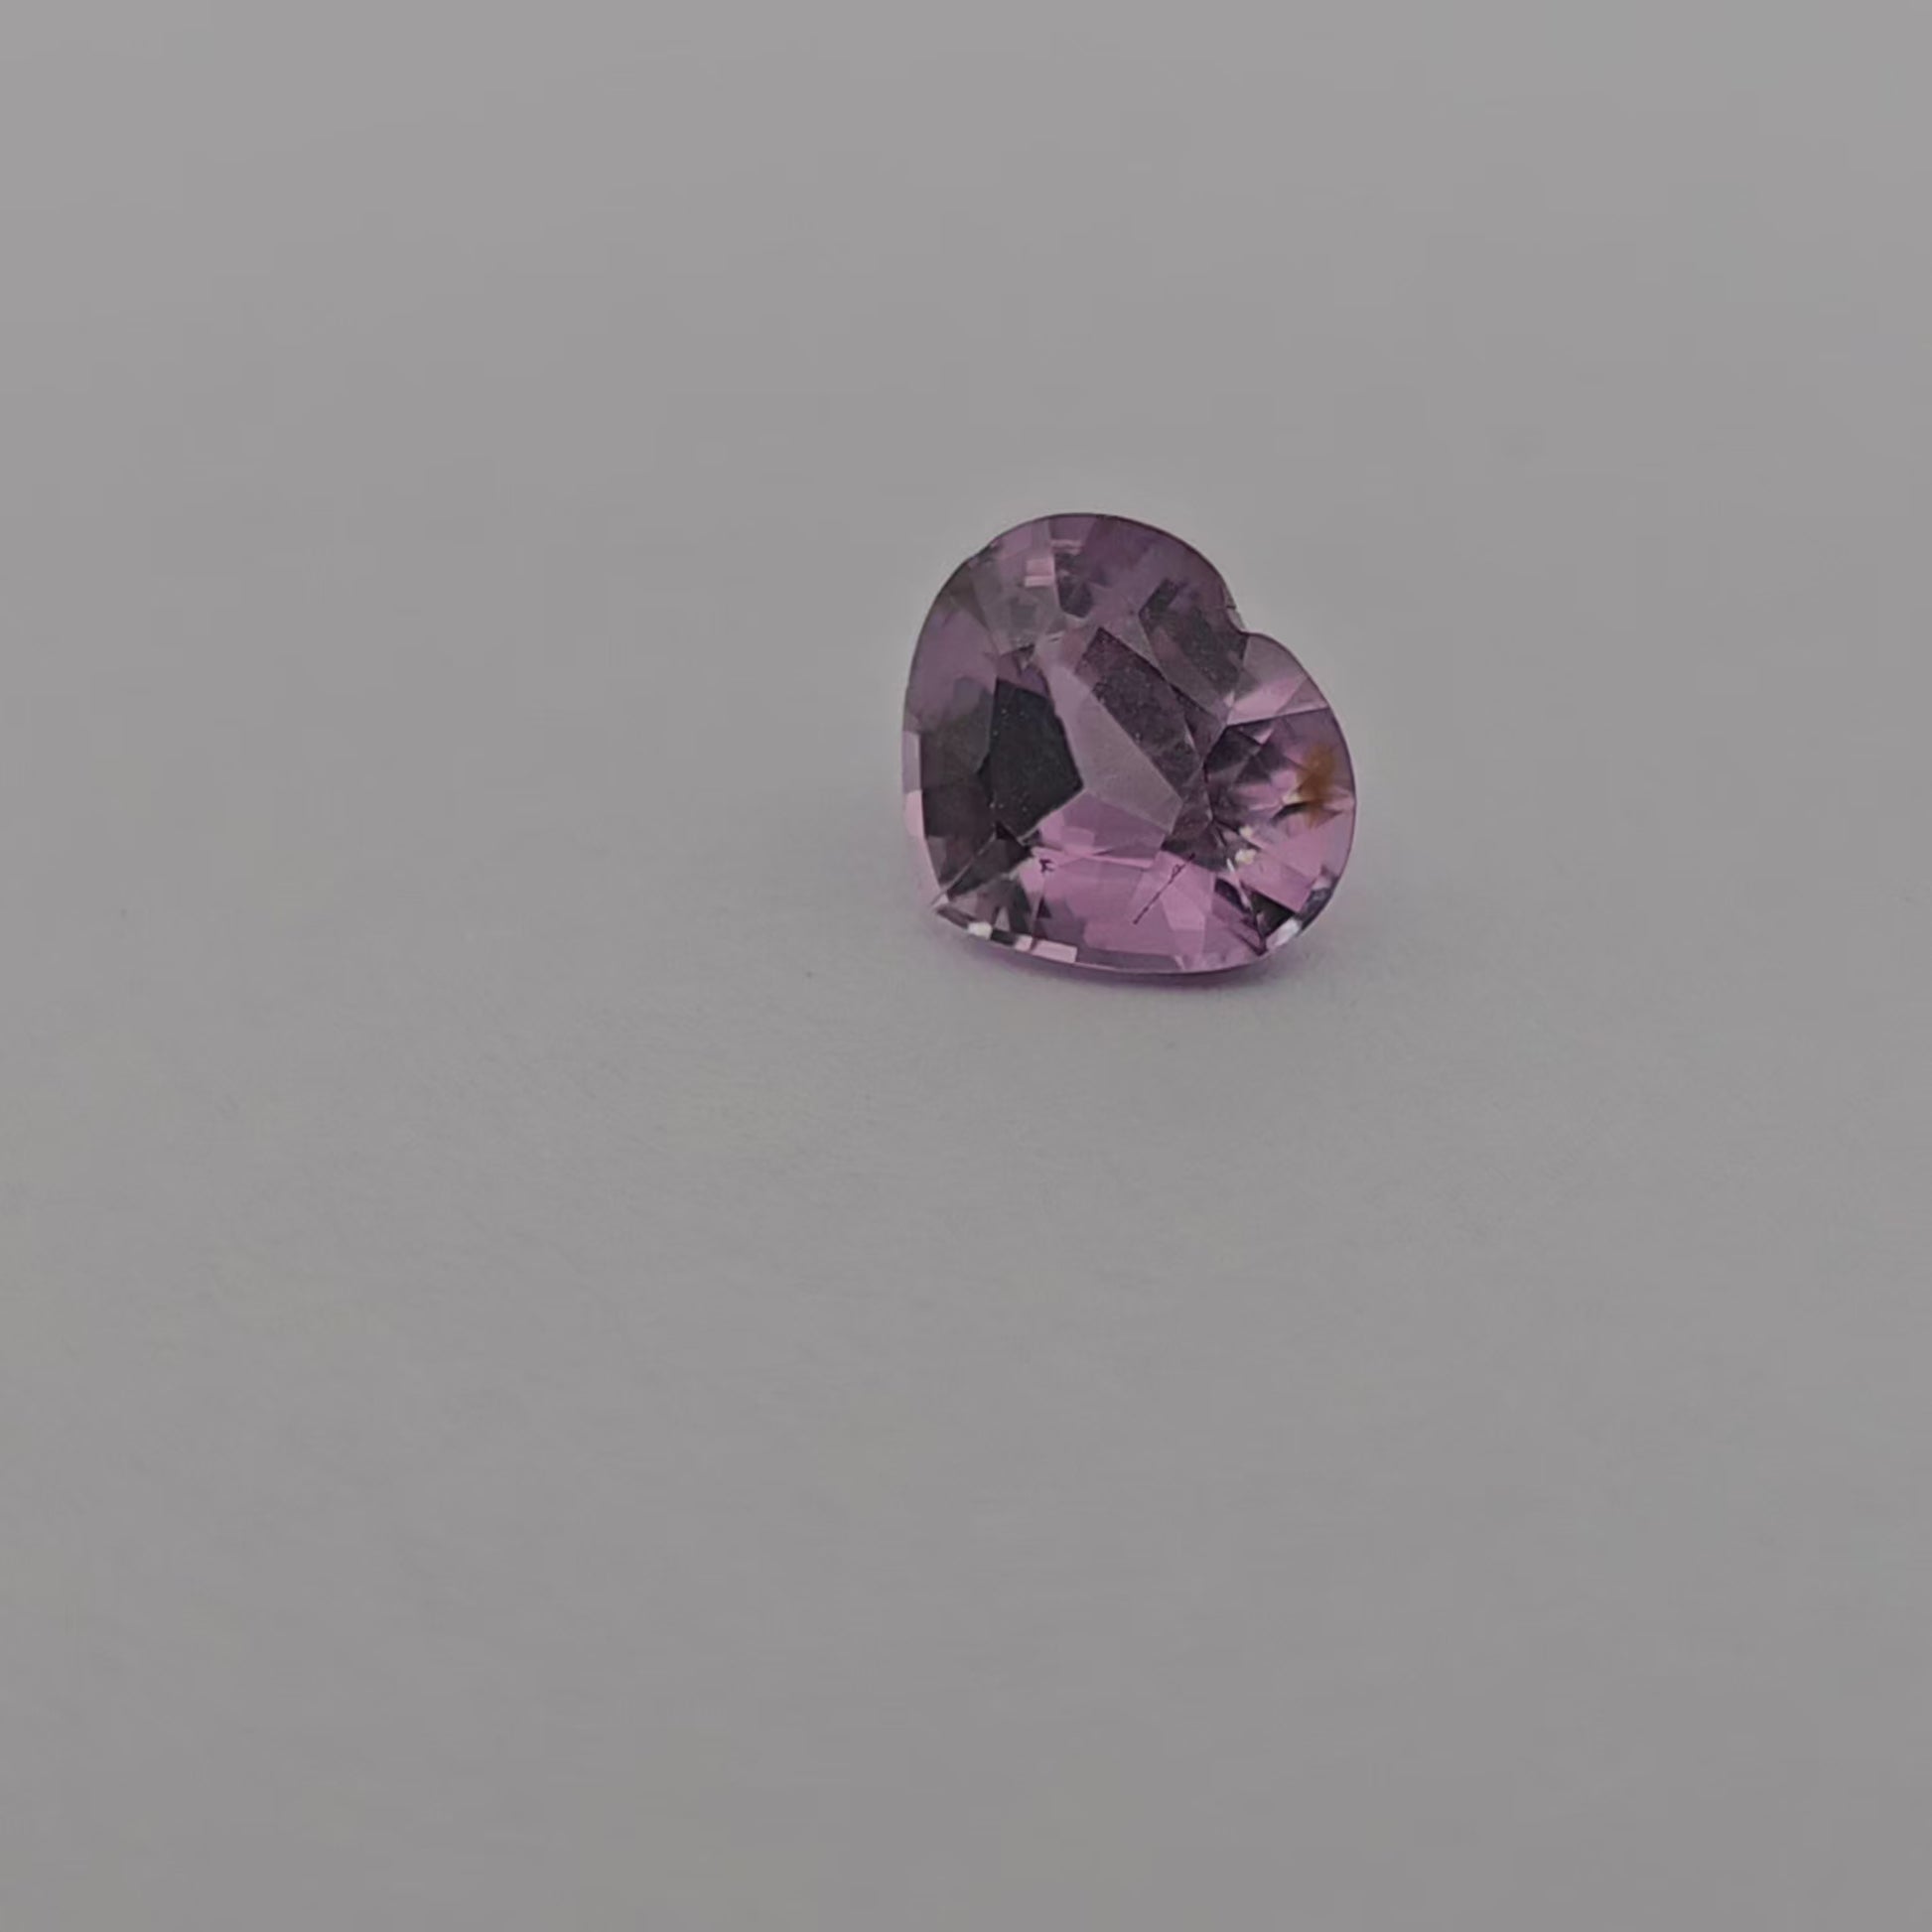 Natural Purple Spinel Stone 1.67 Carats Heart Cut (8.5 x 7.2 mm)